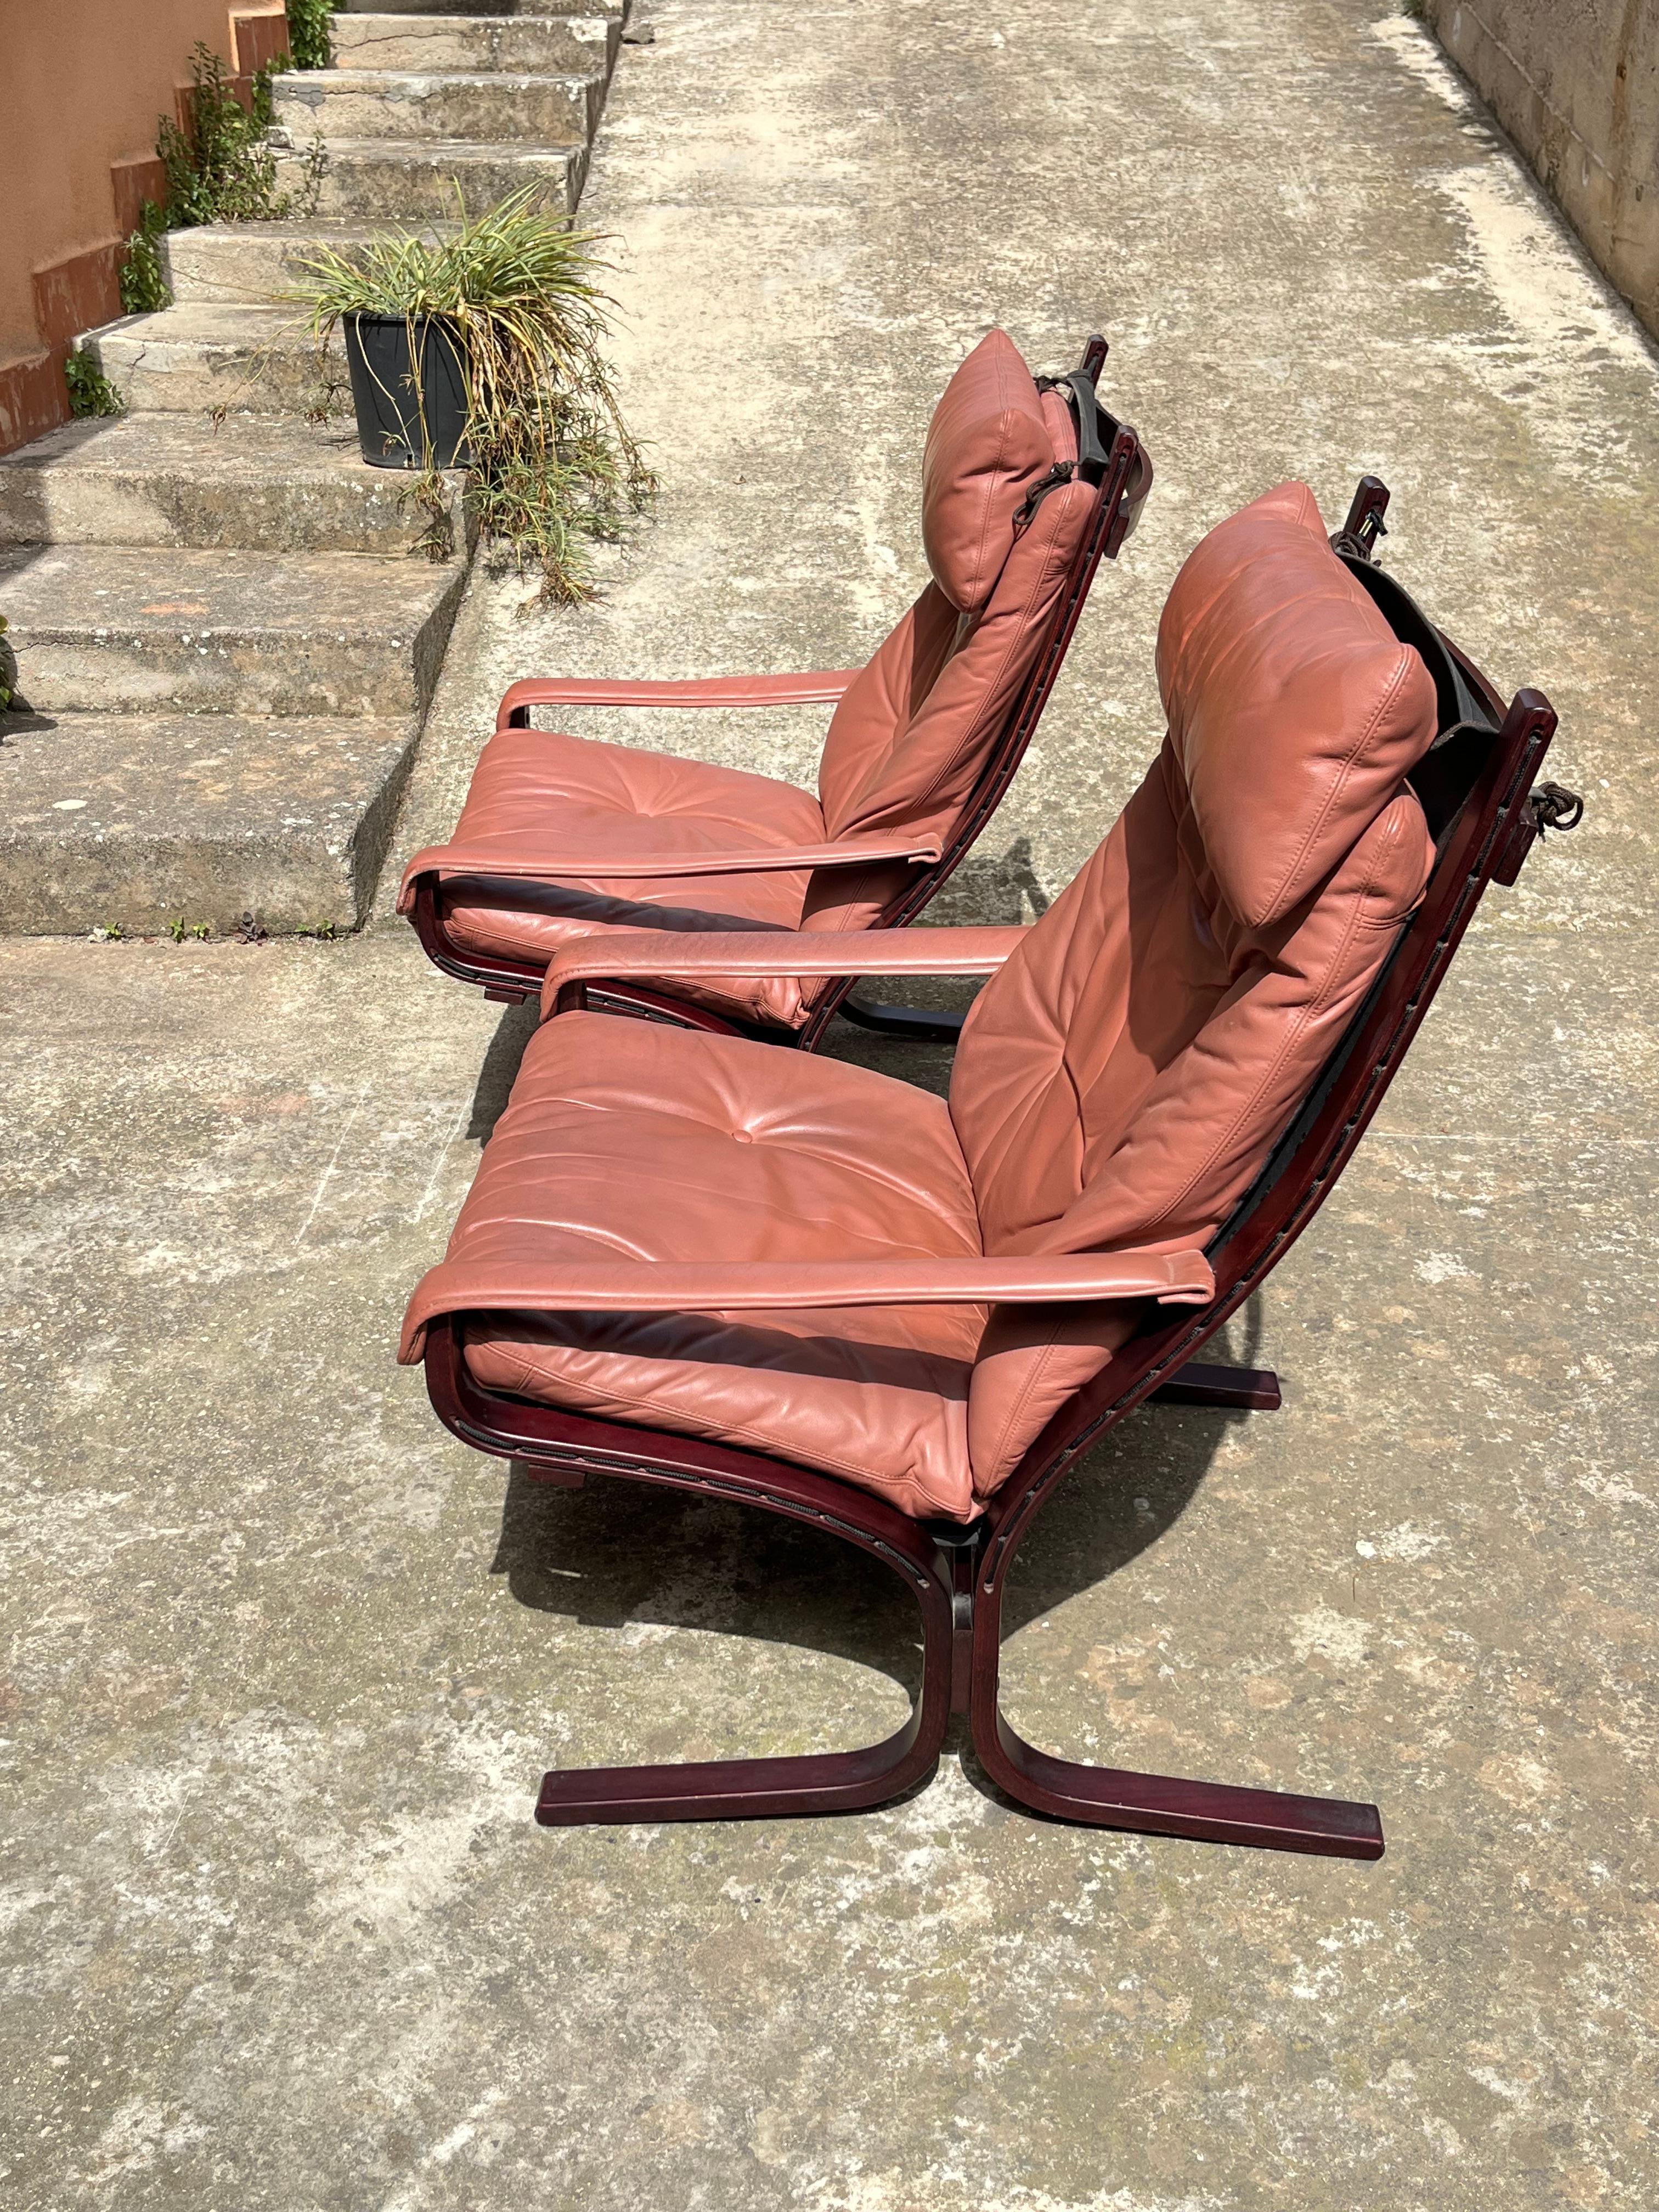 Set of 2 Mid-Century Leather and Teak Armchairs by Inghar Relling for Westnofa Norway 1960s
One is equipped with a footrest.
Intact and in good condition. Small signs of aging.
They will be shipped disassembled to optimize shipping costs.

The